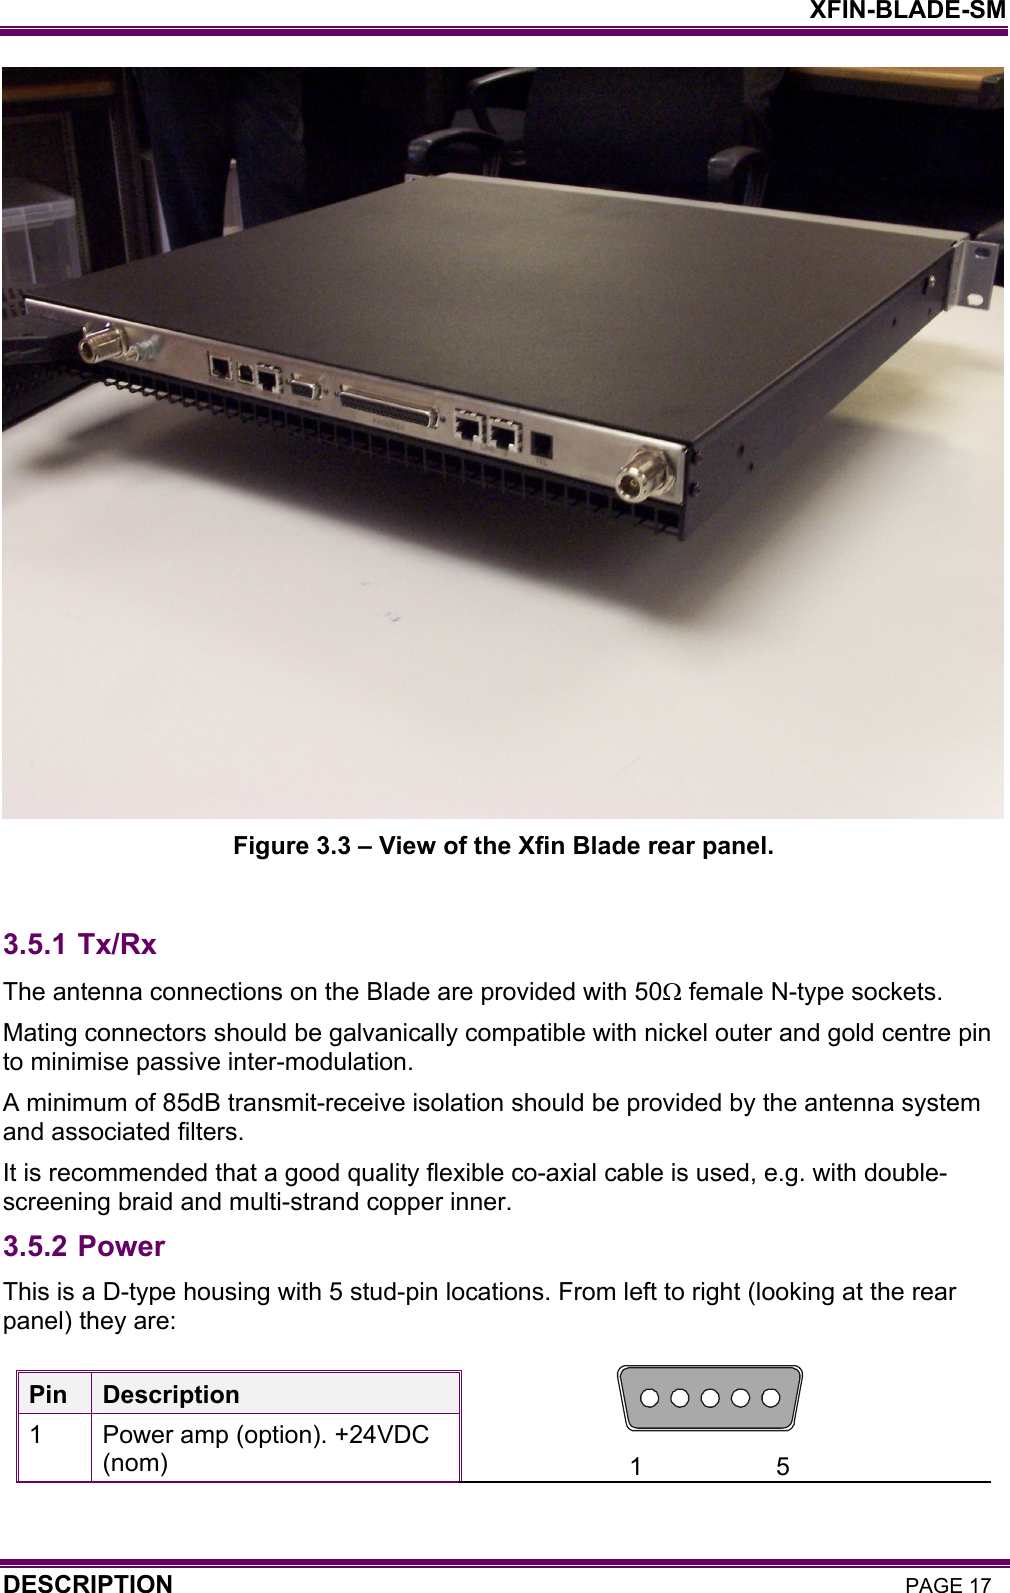    XFIN-BLADE-SM DESCRIPTION PAGE 17  Figure 3.3 – View of the Xfin Blade rear panel.  3.5.1 Tx/Rx The antenna connections on the Blade are provided with 50Ω female N-type sockets.  Mating connectors should be galvanically compatible with nickel outer and gold centre pin to minimise passive inter-modulation.  A minimum of 85dB transmit-receive isolation should be provided by the antenna system and associated filters.  It is recommended that a good quality flexible co-axial cable is used, e.g. with double-screening braid and multi-strand copper inner. 3.5.2 Power  This is a D-type housing with 5 stud-pin locations. From left to right (looking at the rear panel) they are:   Pin  Description 1  Power amp (option). +24VDC (nom)  1                   5 